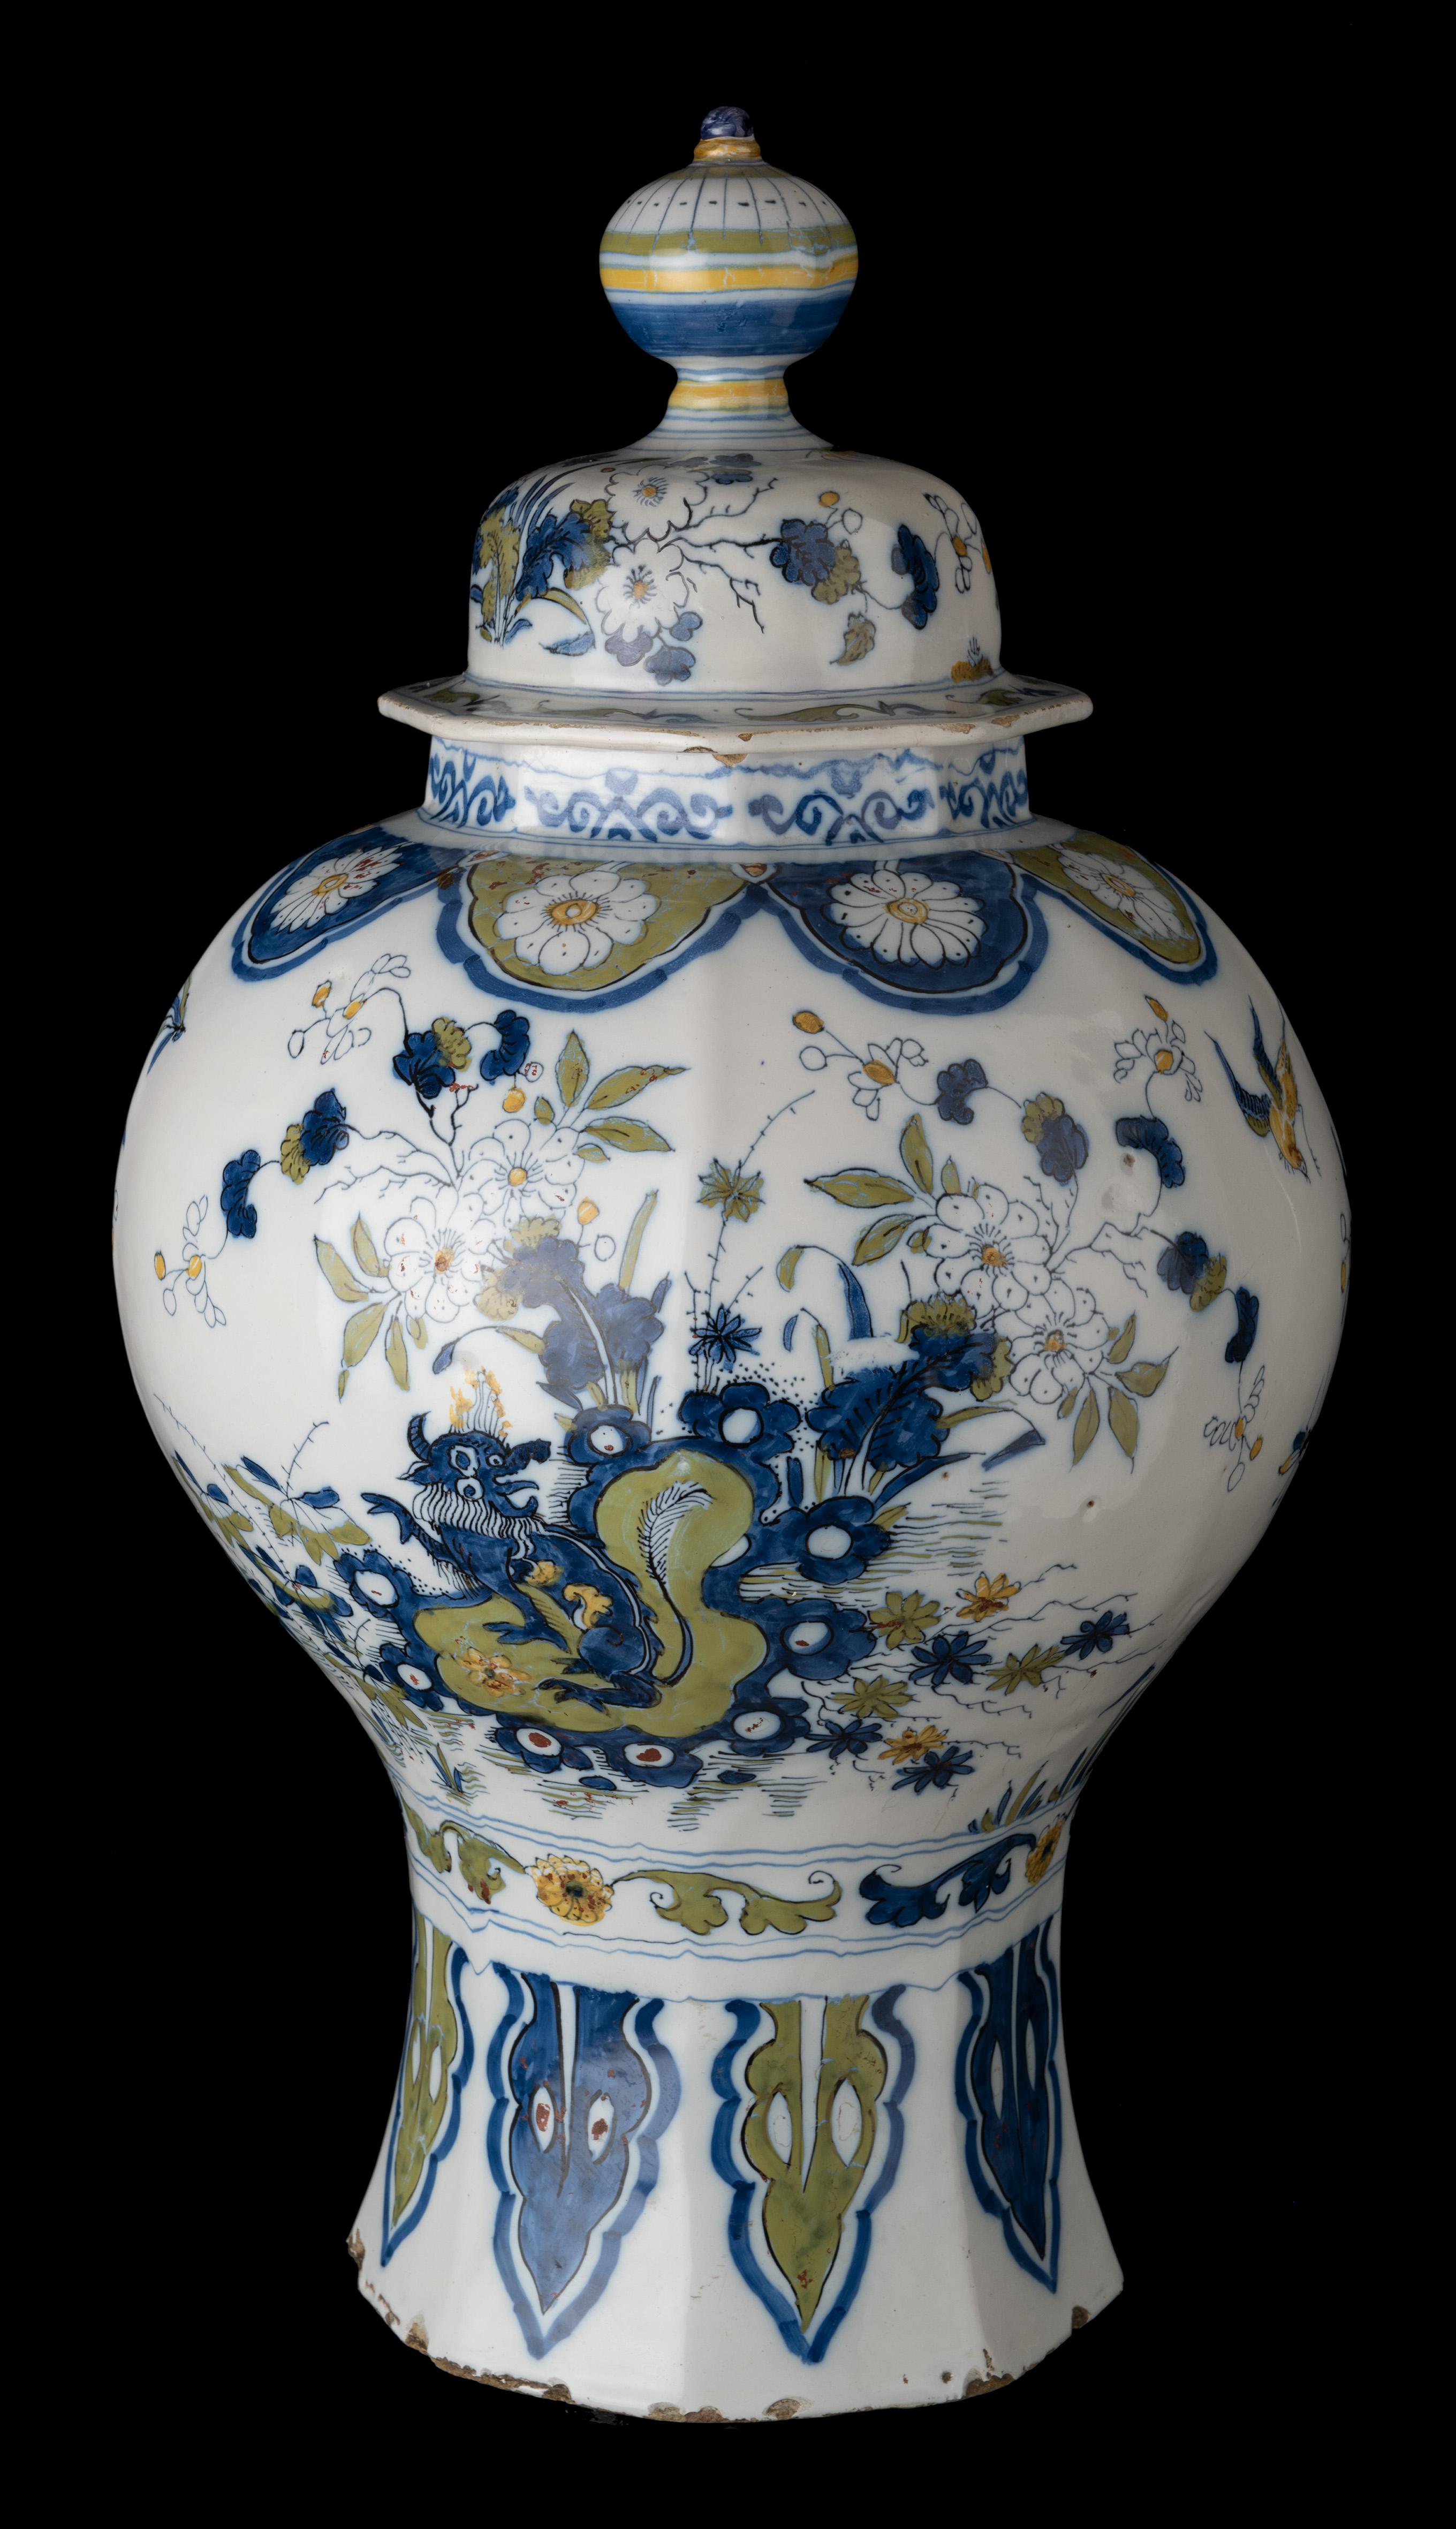 Dutch Delft Polychrome Covered Jar with Peacock and Dragon in Landscape, 1690-1700 For Sale